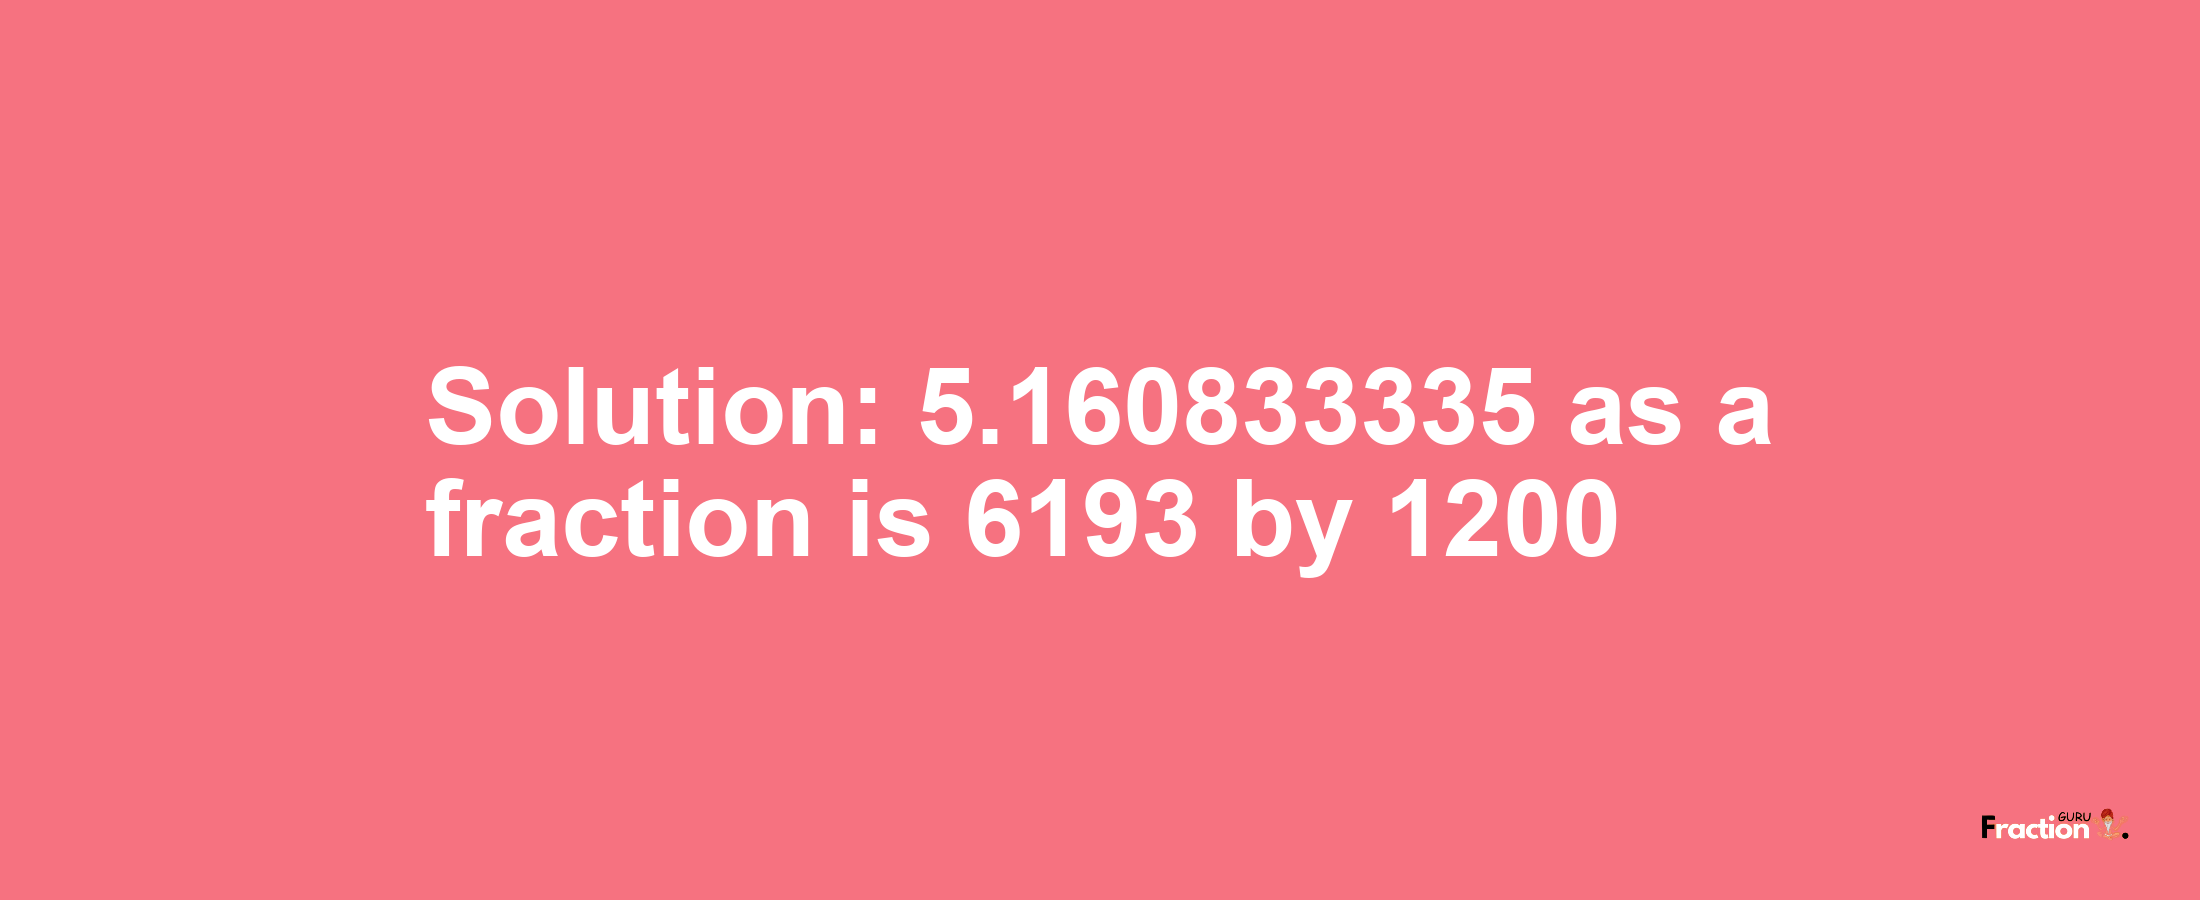 Solution:5.160833335 as a fraction is 6193/1200